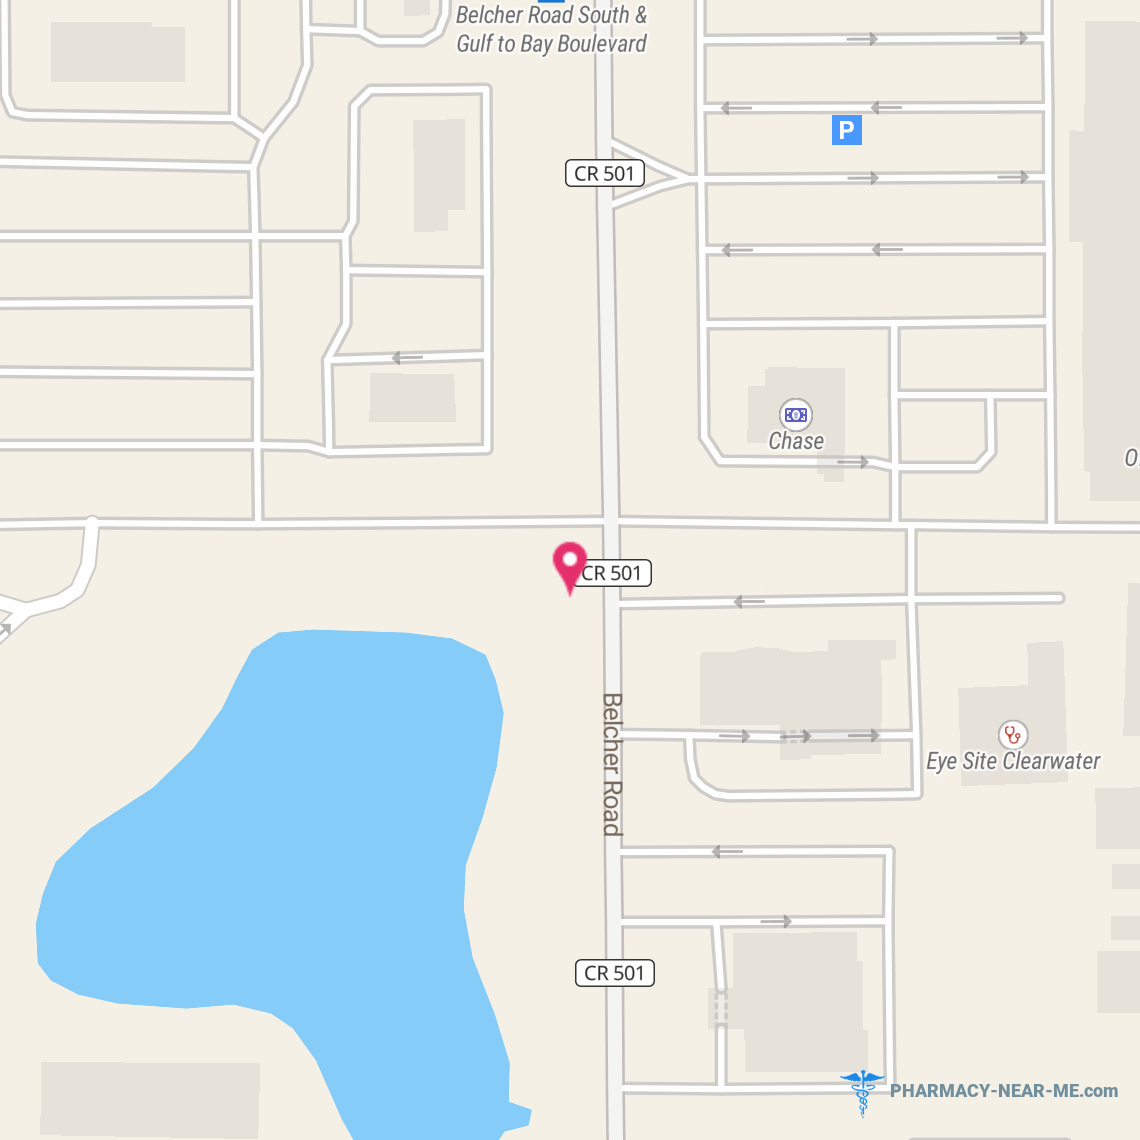 BAYCARE URGENT CARE, LLC - Pharmacy Hours, Phone, Reviews & Information: 711 S Belcher Rd, Clearwater, Florida 33764, United States